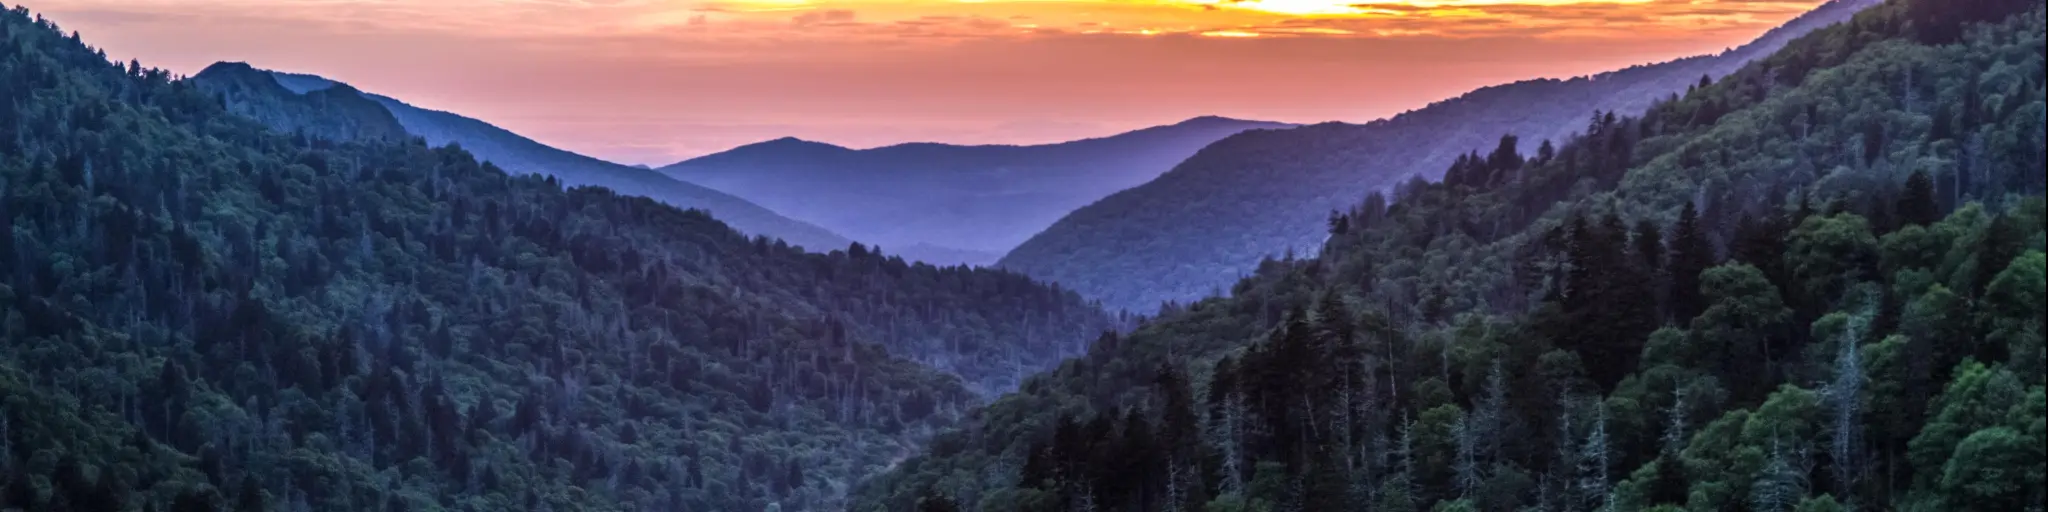 Great Smoky Mountains, Tennessee, USA at sunset with a panorama over the many layers and ridges of the beautiful Appalachian Mountains.